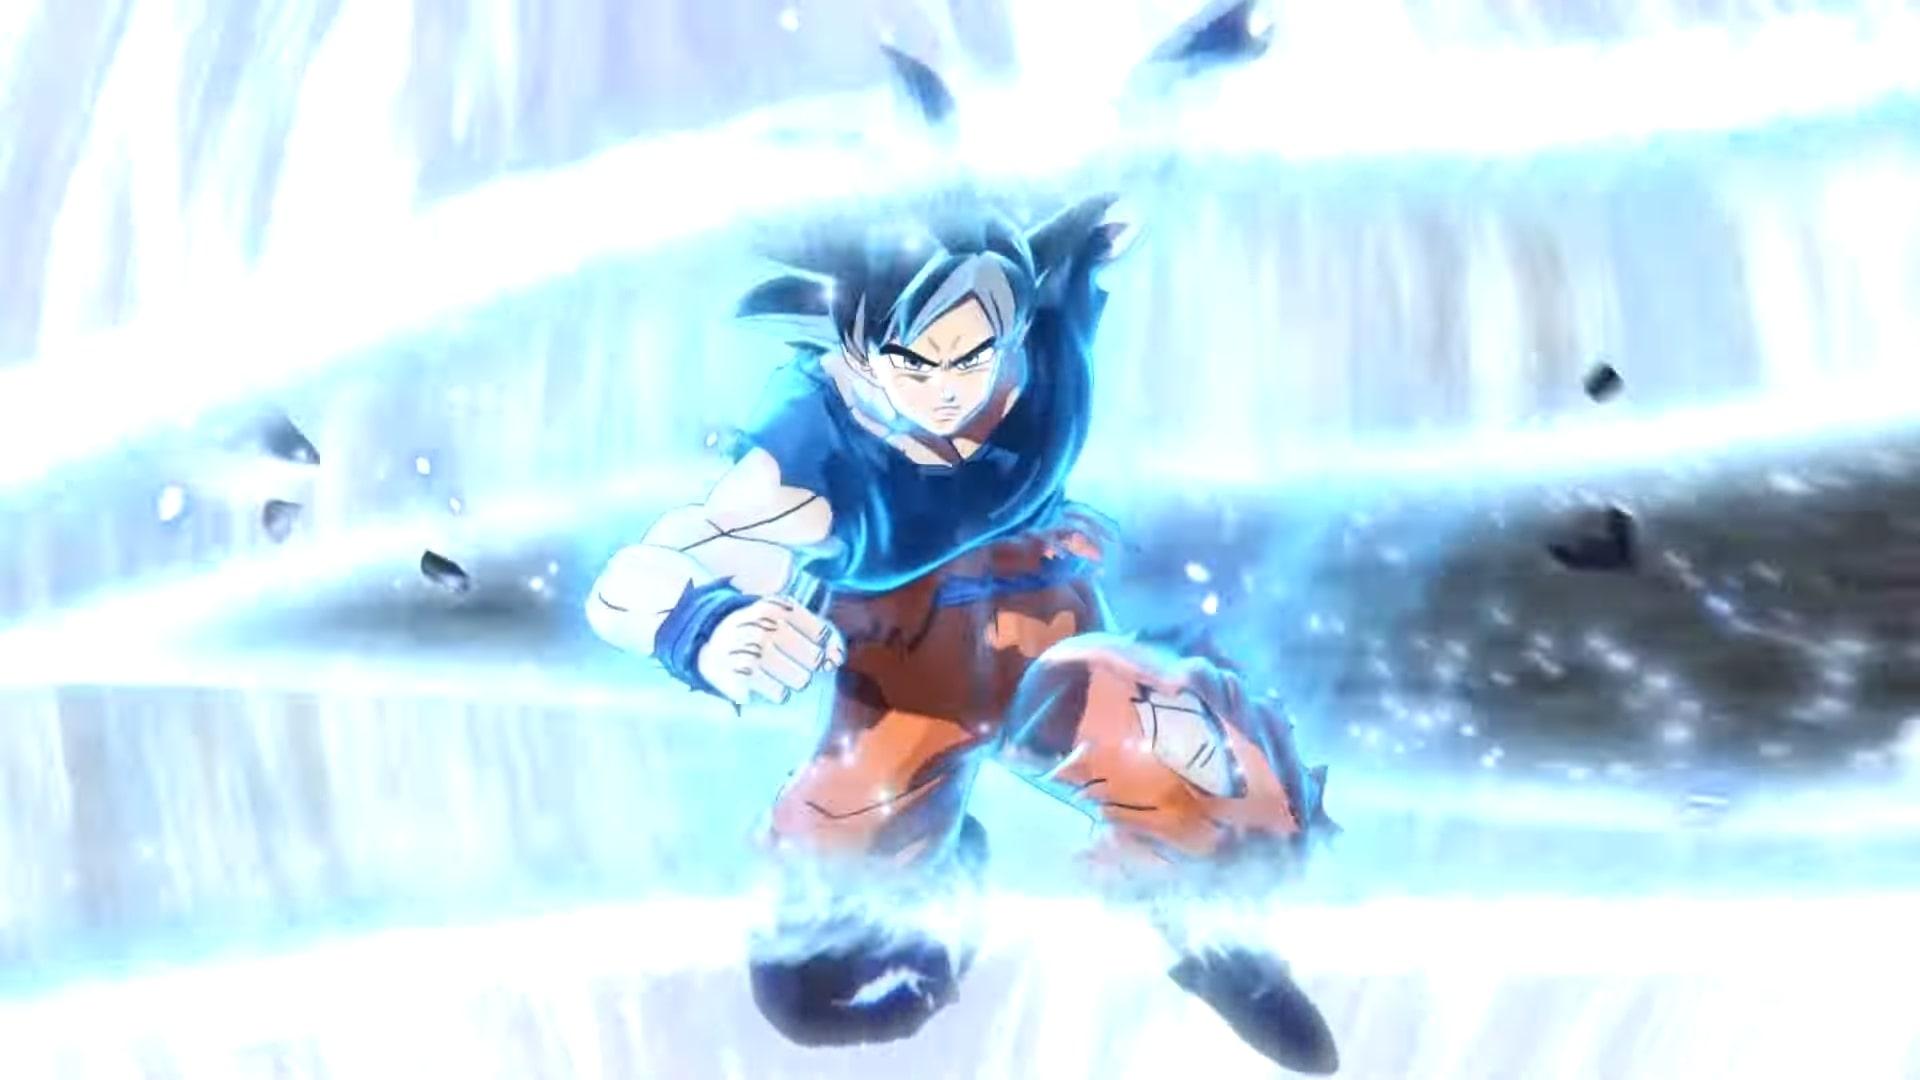 Dragon Ball Xenoverse 3 in the Works, According to Leaks